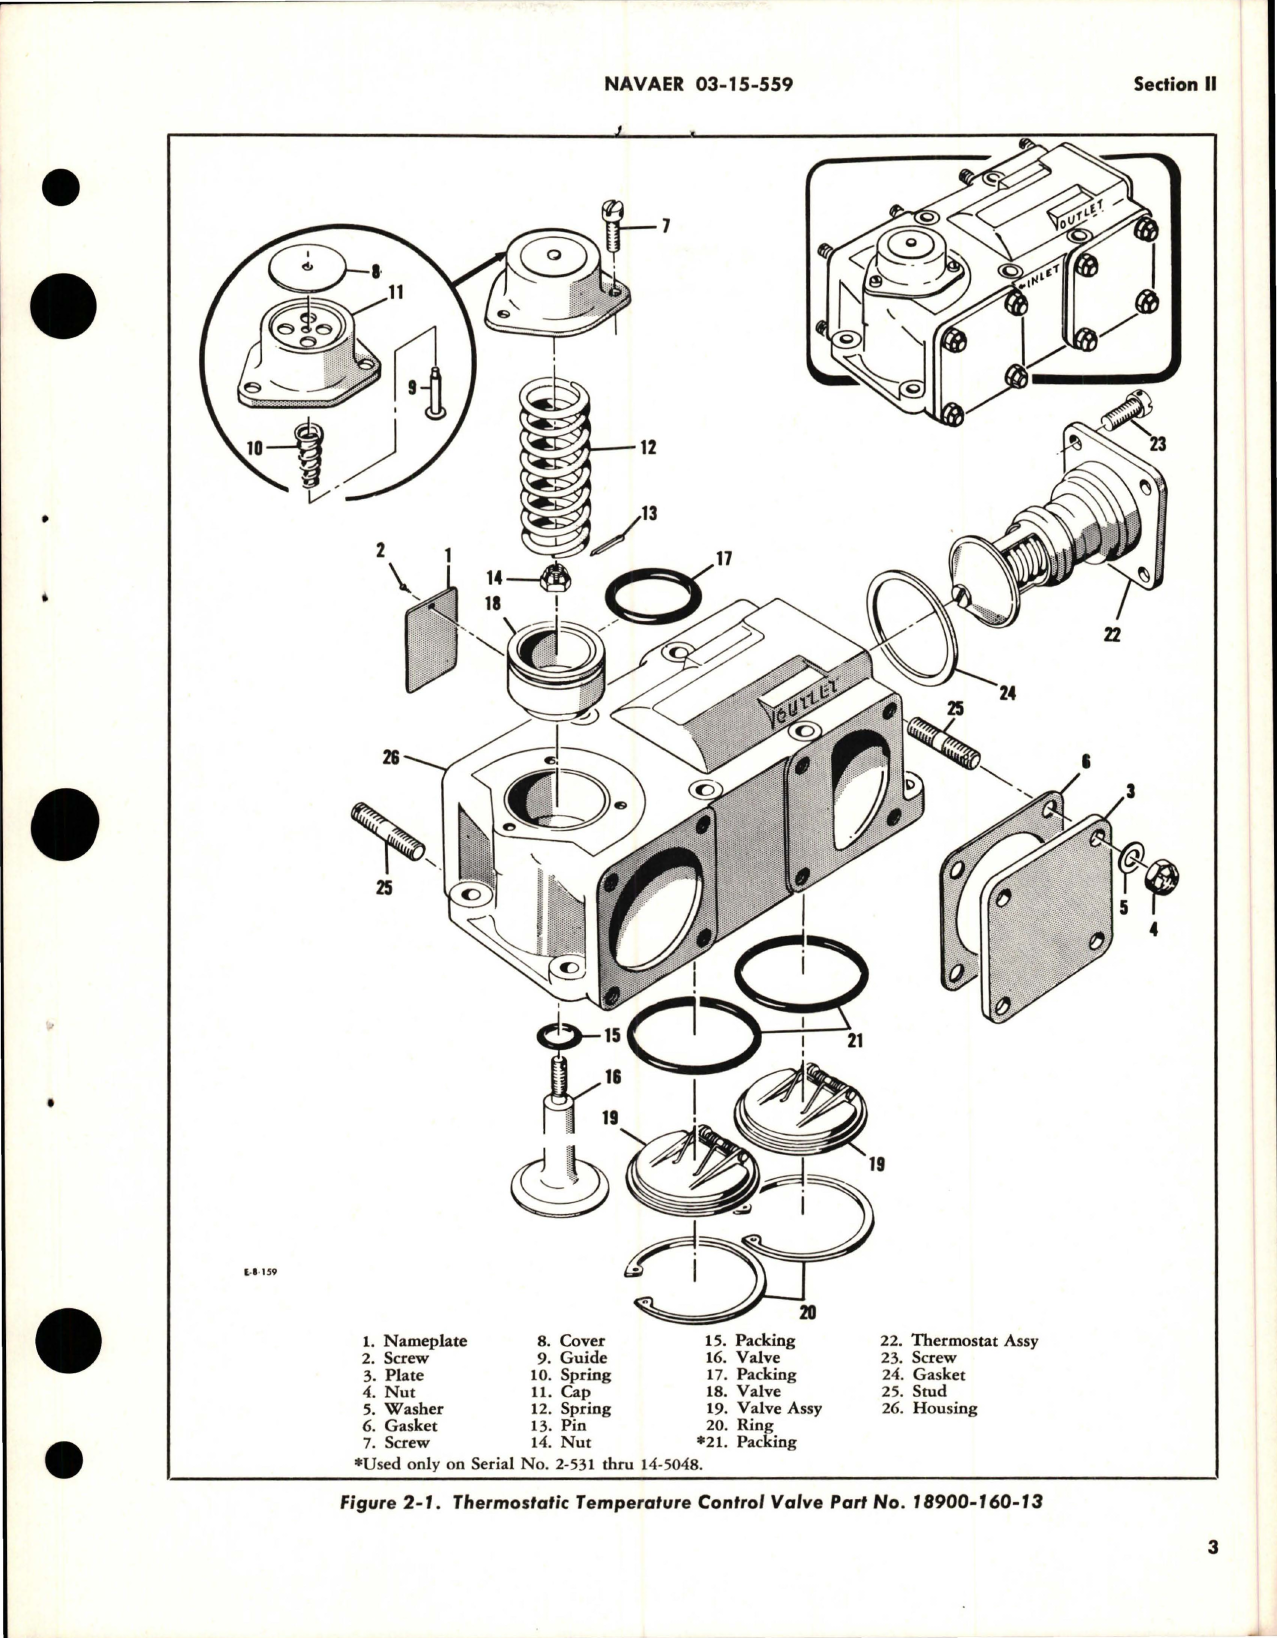 Sample page 7 from AirCorps Library document: Overhaul Instructions for Thermostatic Temperature Control Valves